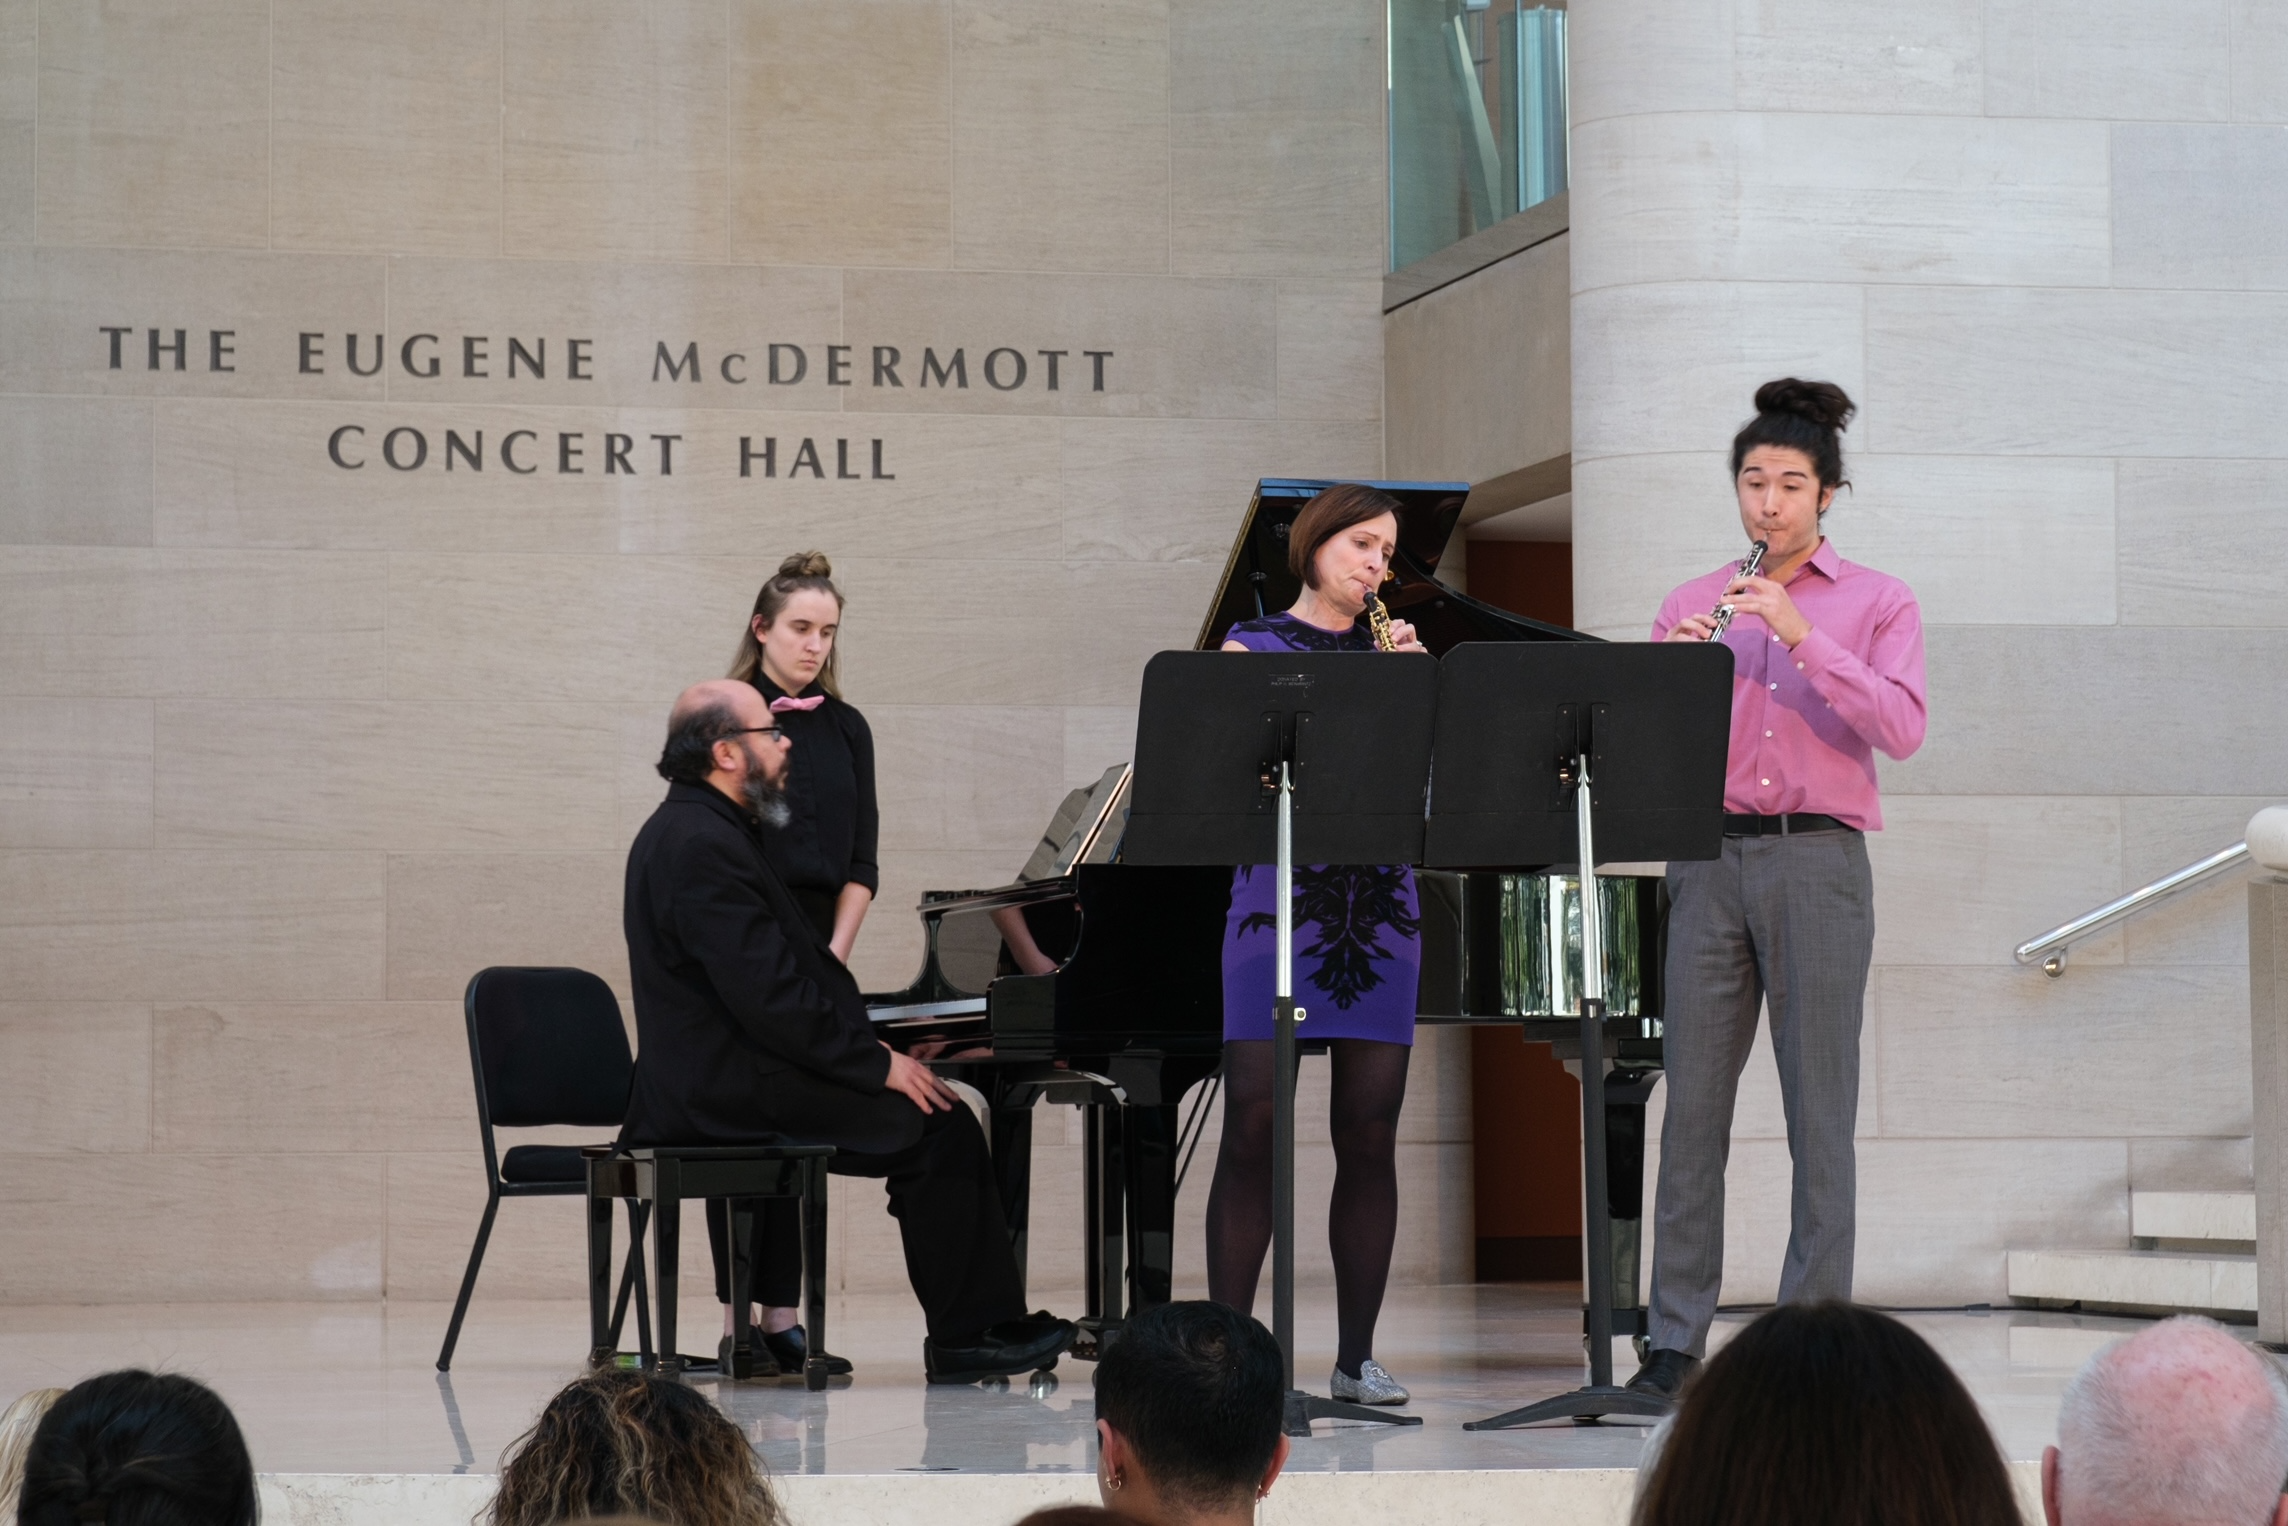 Oboists Erin Hannigan and Maxwell Adler (M.M. ’21, P.D. ’22) perform together.